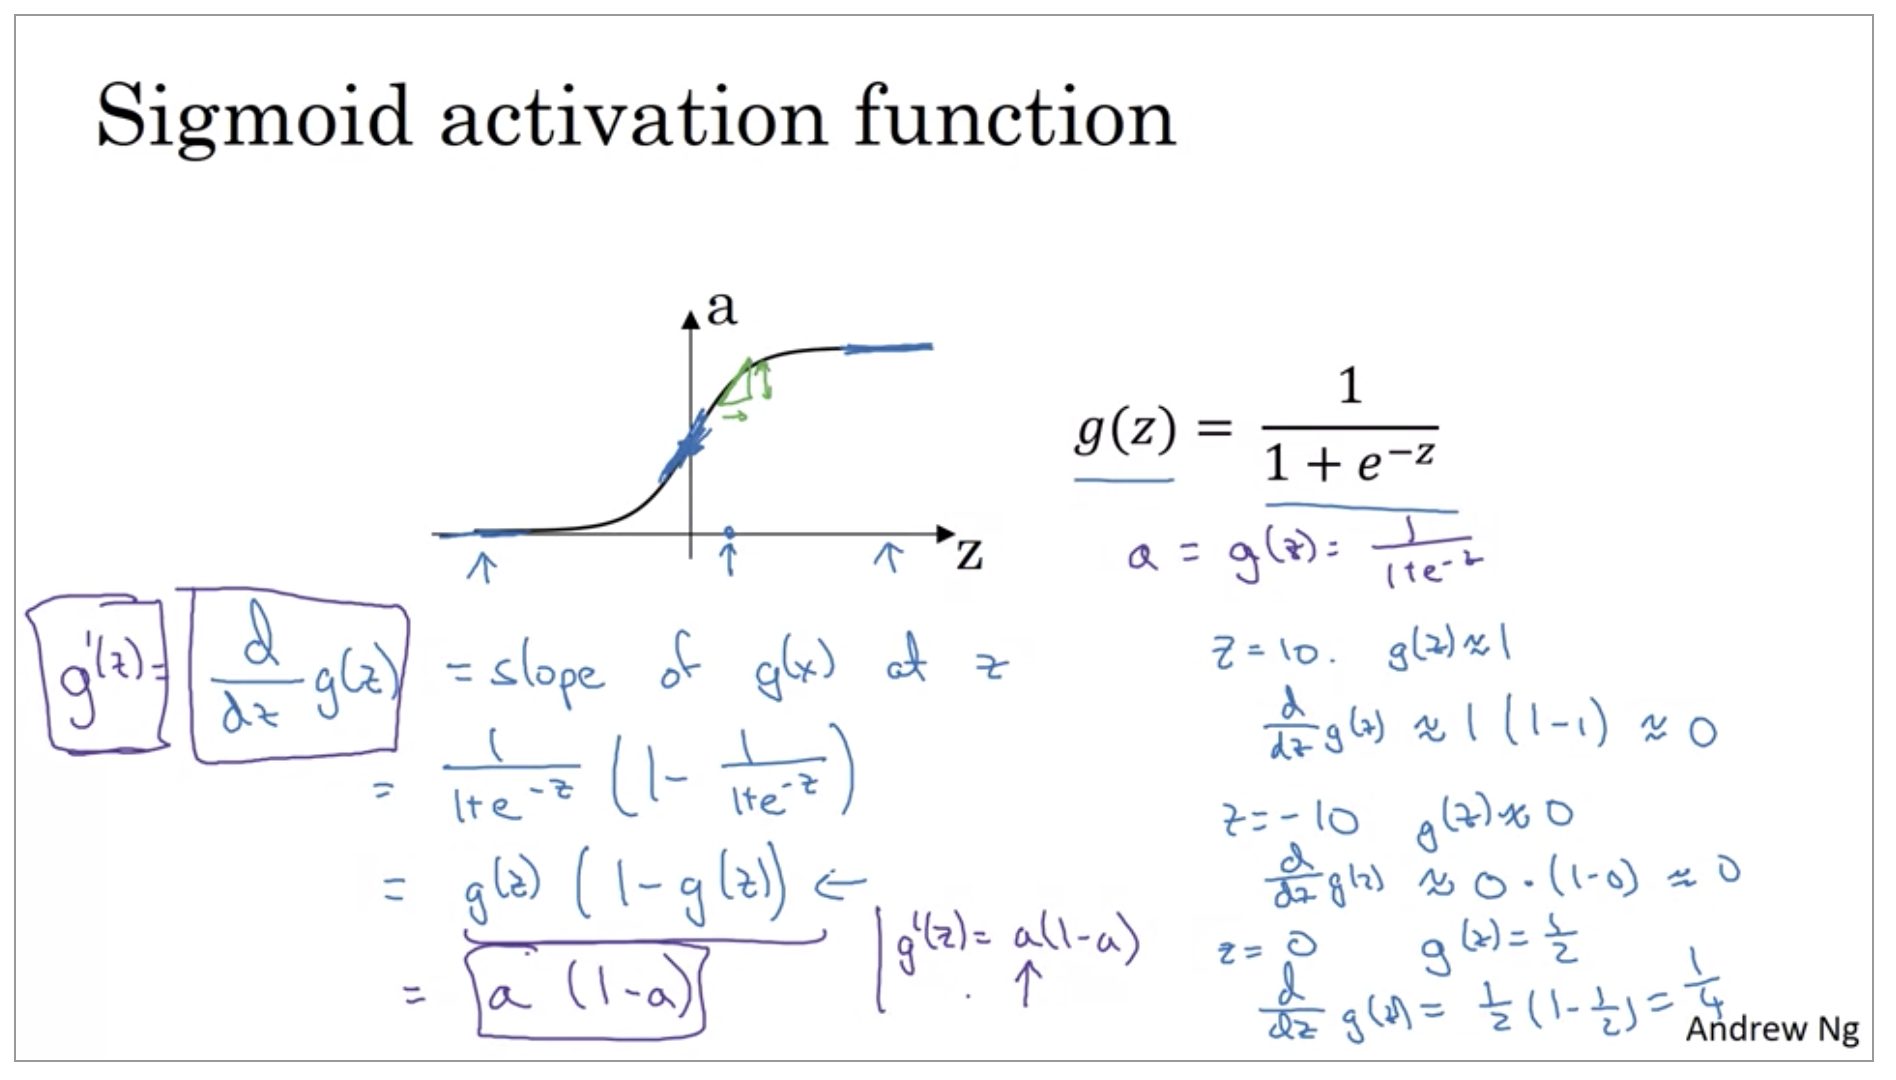 sigmoid-activation-function.png